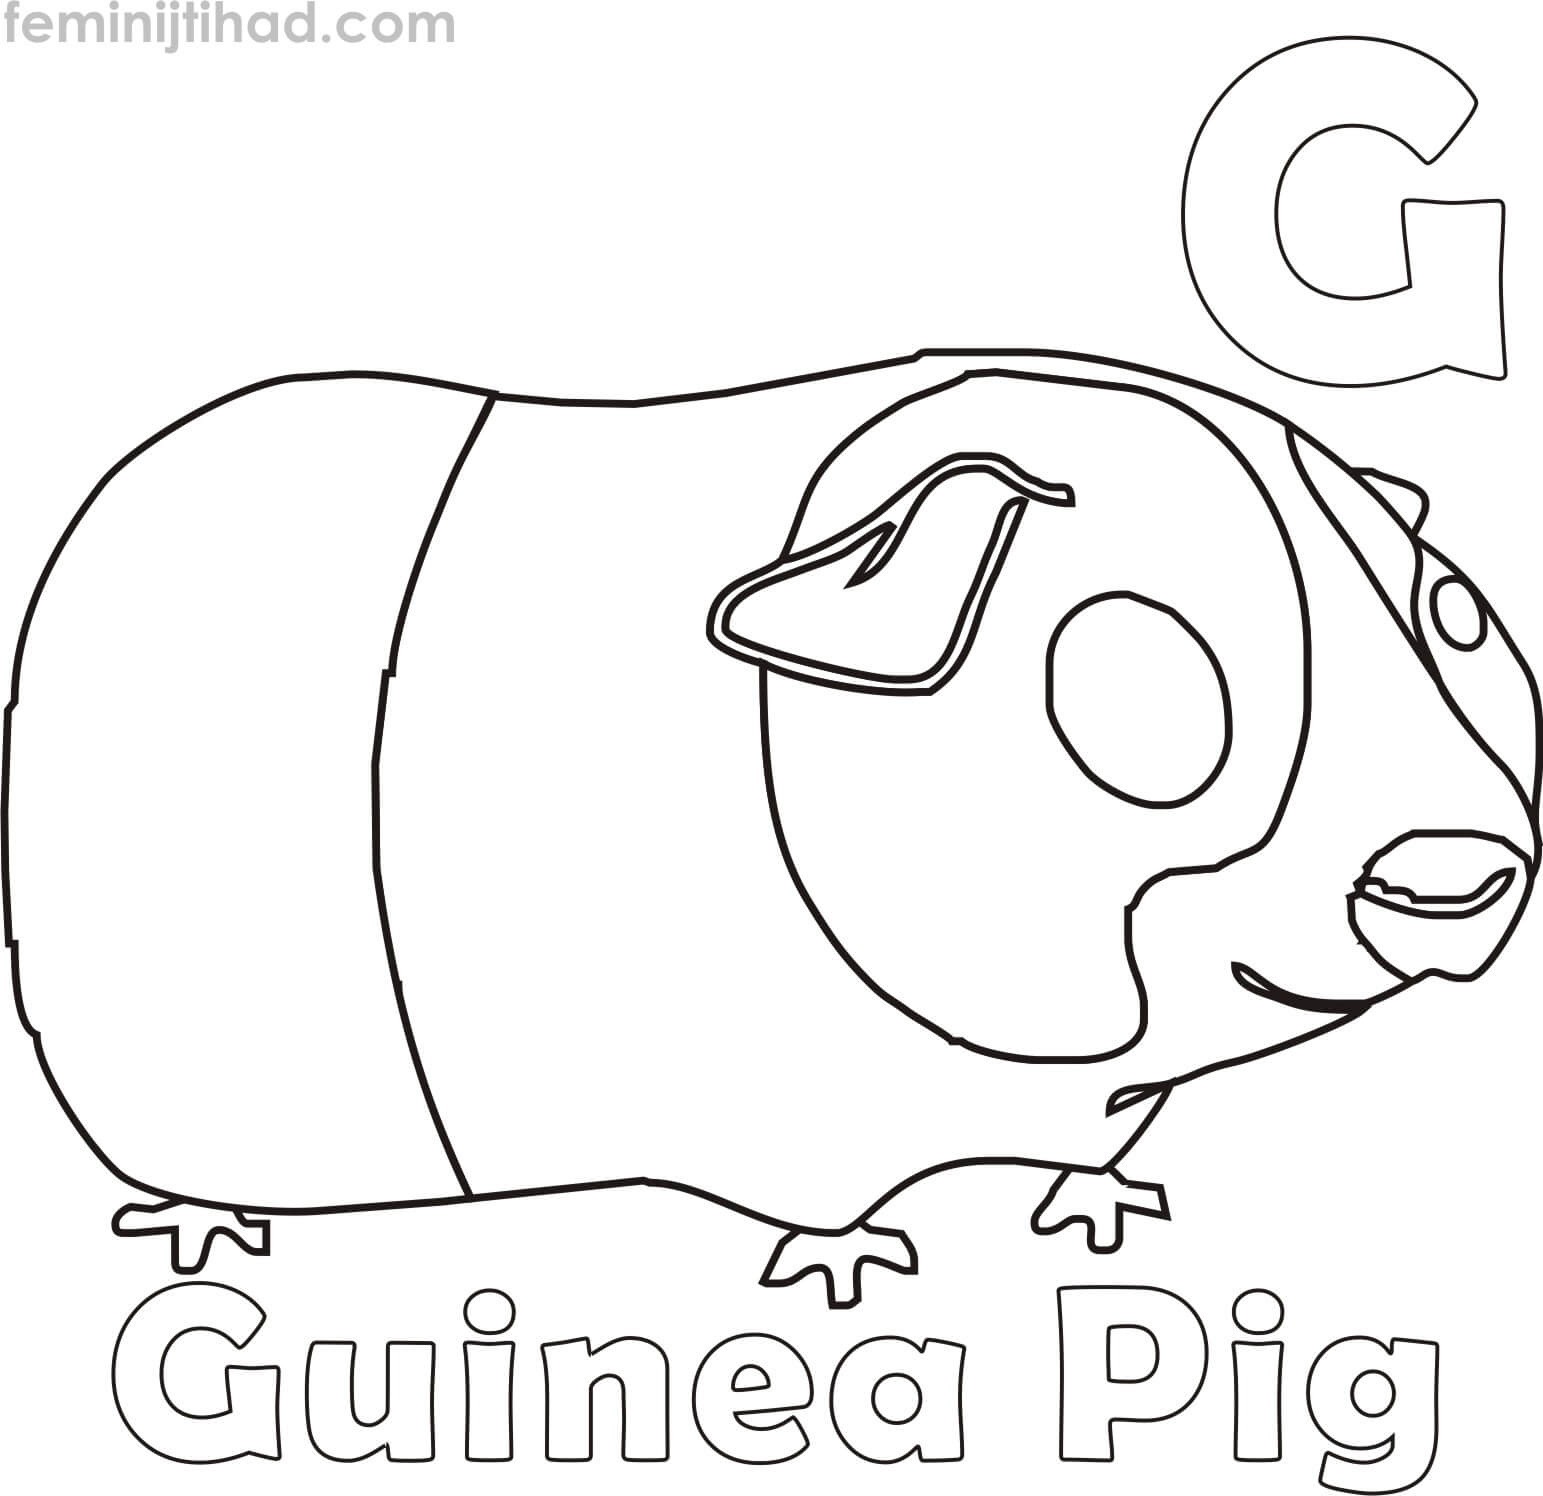 Guinea Pig coloring page